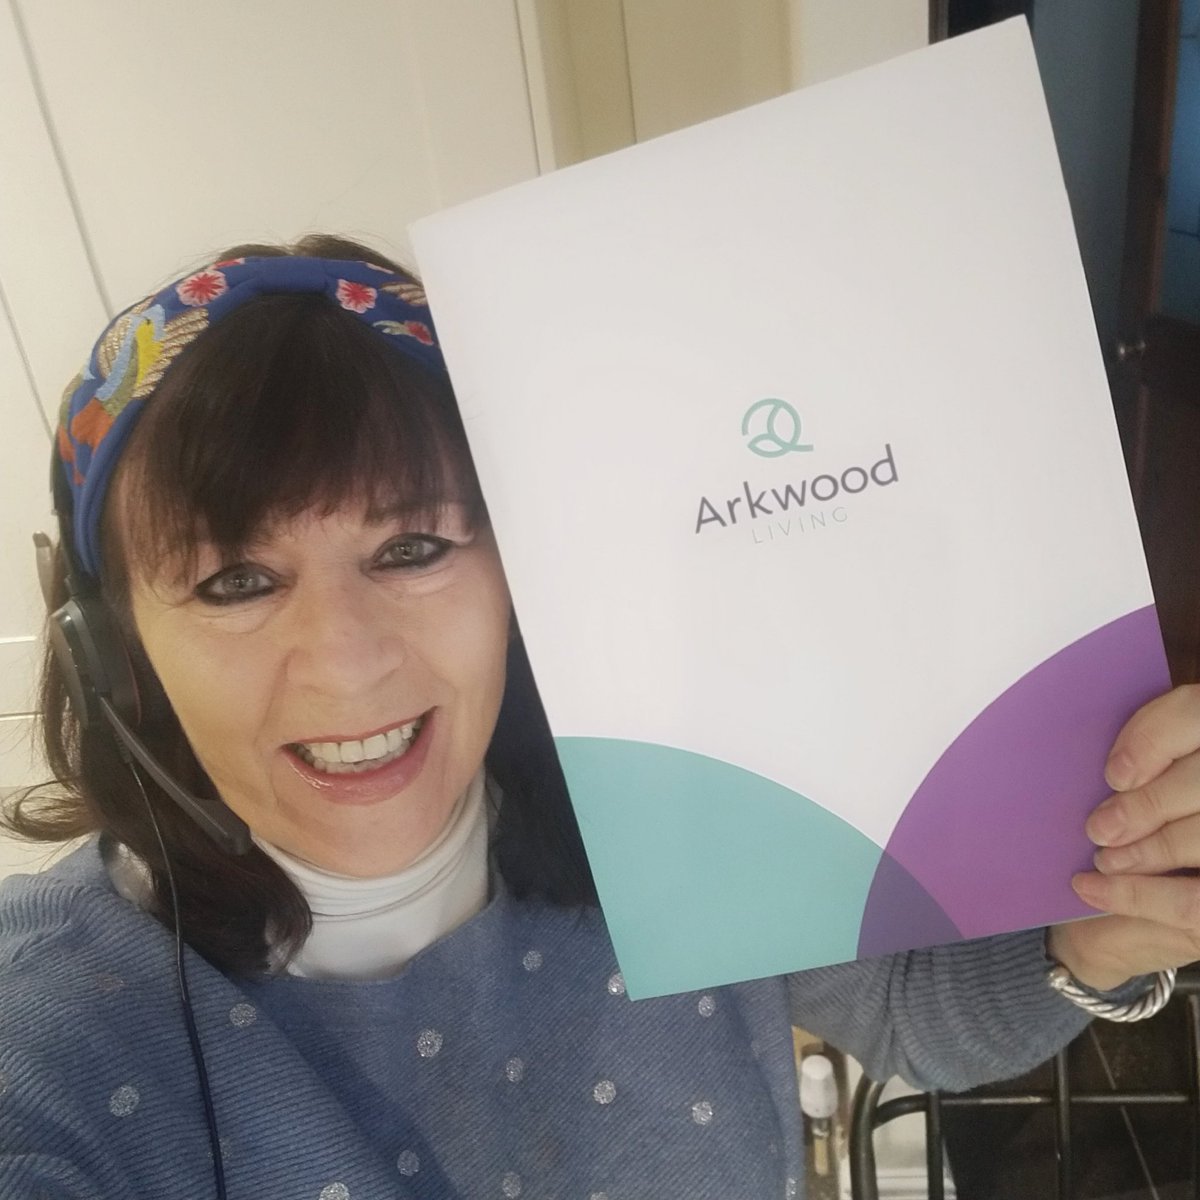 Busy day getting to know the 'product'. Getting back in the swim of housing jargon 😁!
Lots of meetings online, learning, meeting and digesting 🙃 
#busylife #learning #brainingear #arkwood #headset